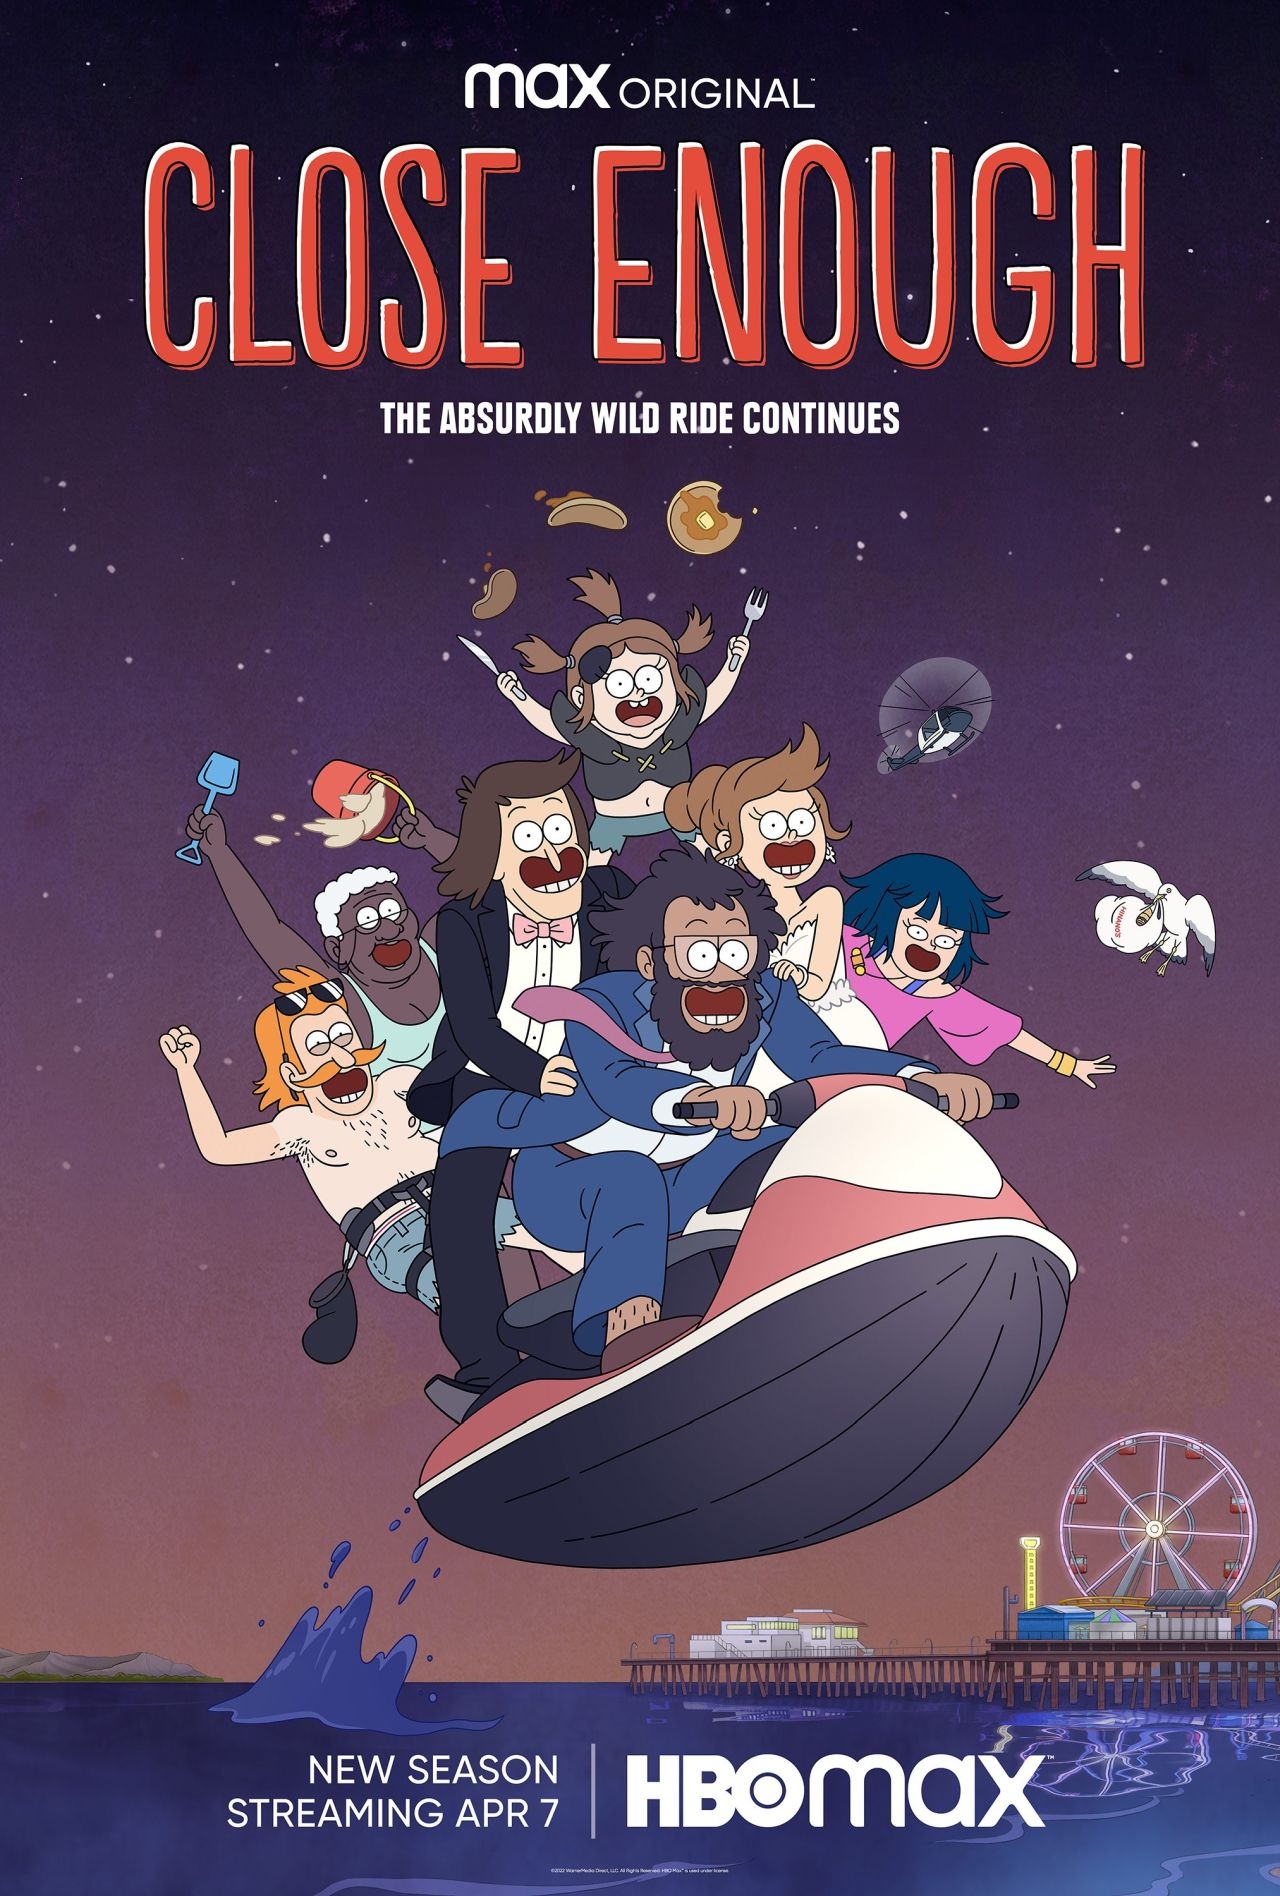 Image of a show called Close Enough on HBO